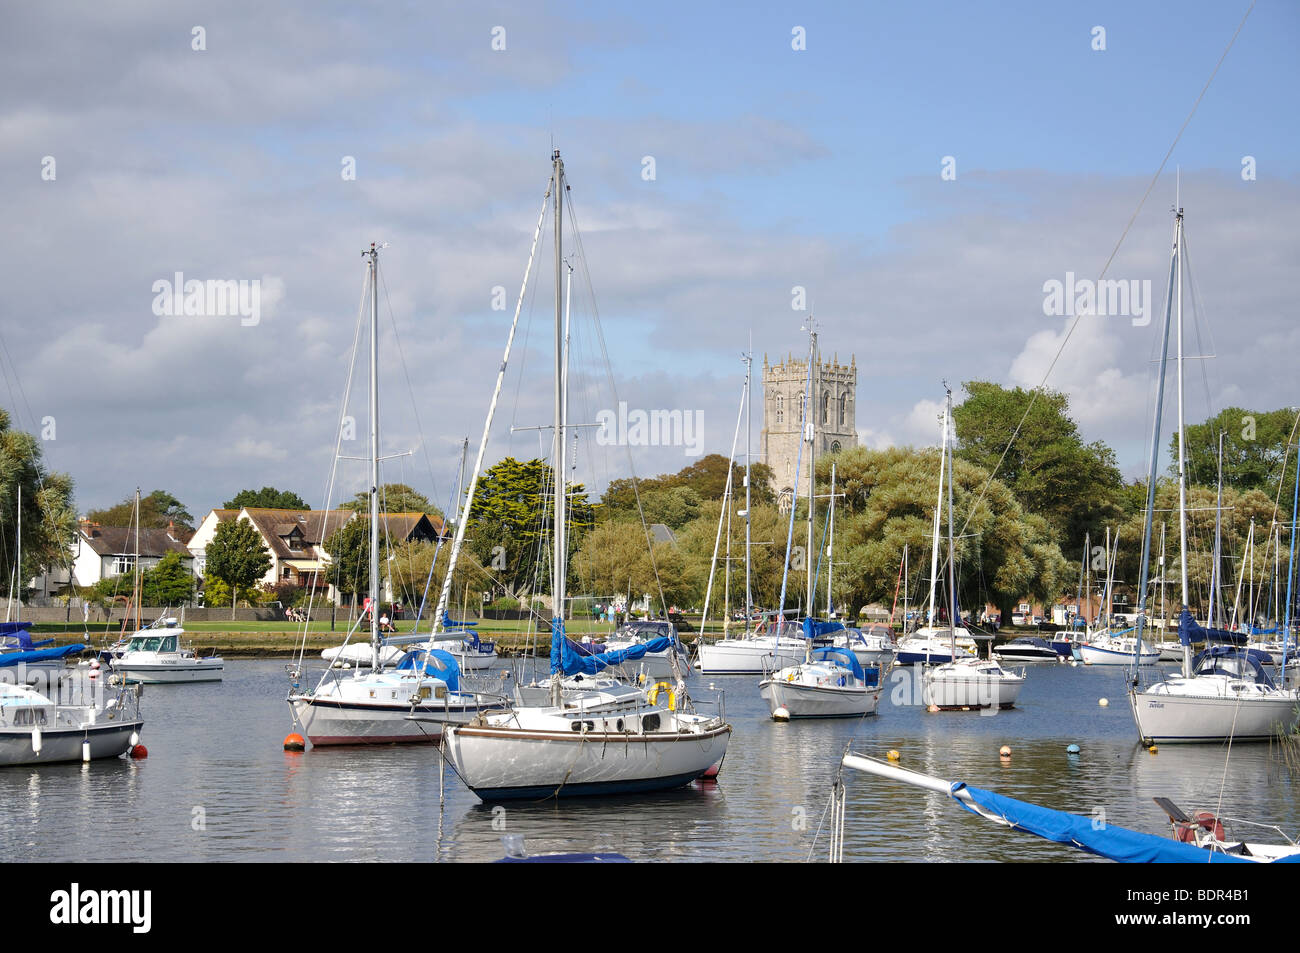 Town view from Wick Marsh across River Stour, Christchurch, Dorset, England, United Kingdom Stock Photo